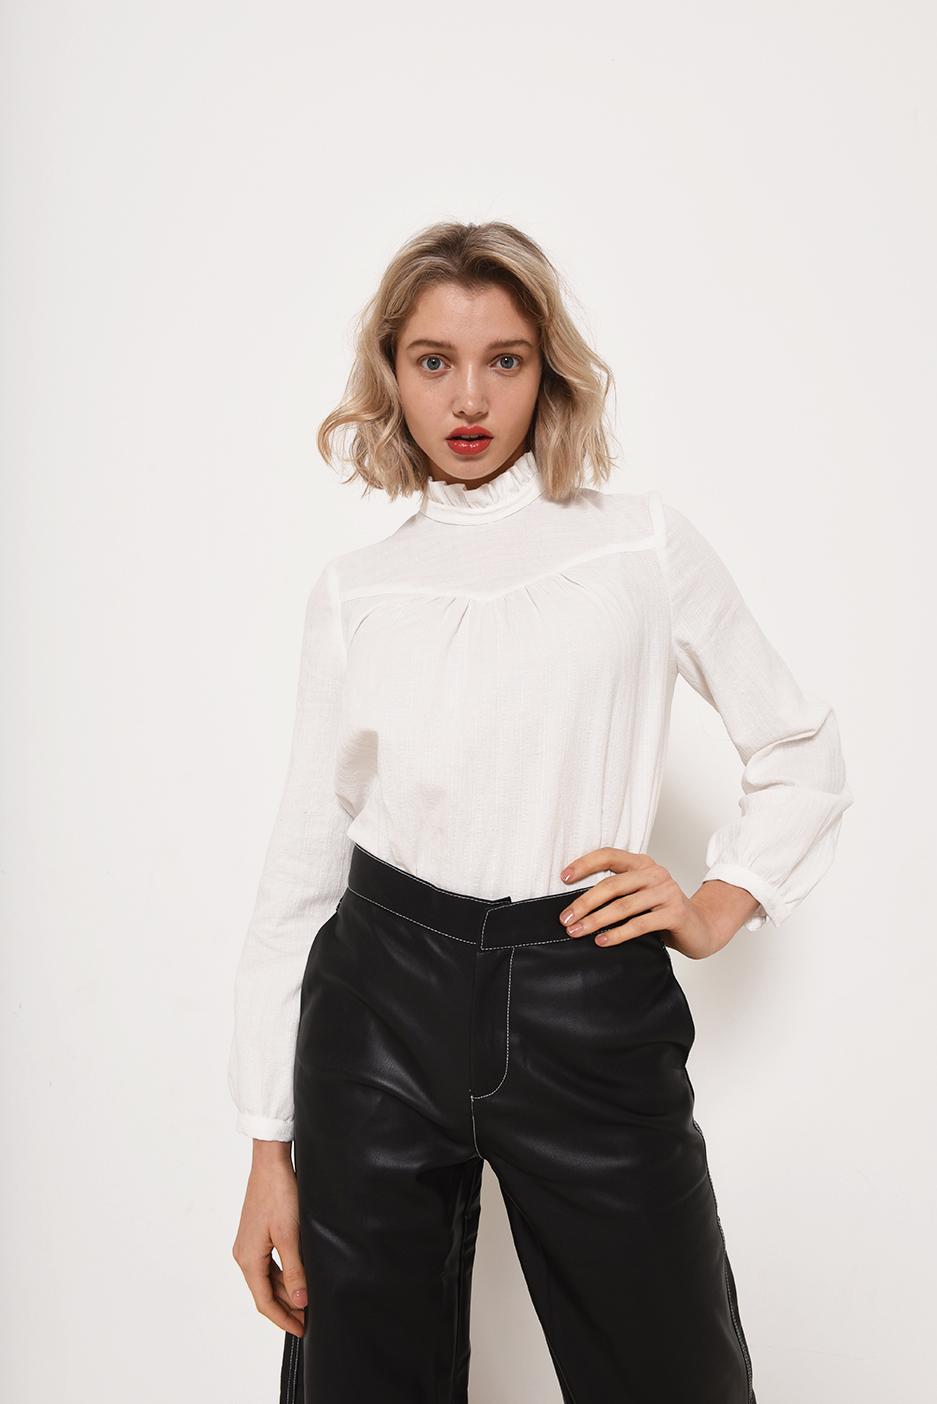 Woman wearing the Victoria Top sewing pattern from Fibre Mood on The Fold Line. A blouse pattern made in cottons or viscose fabrics, featuring a ruffle collar, front yoke with gathers, long sleeves with cuffs, hook and eye back neck closure, and relaxed f